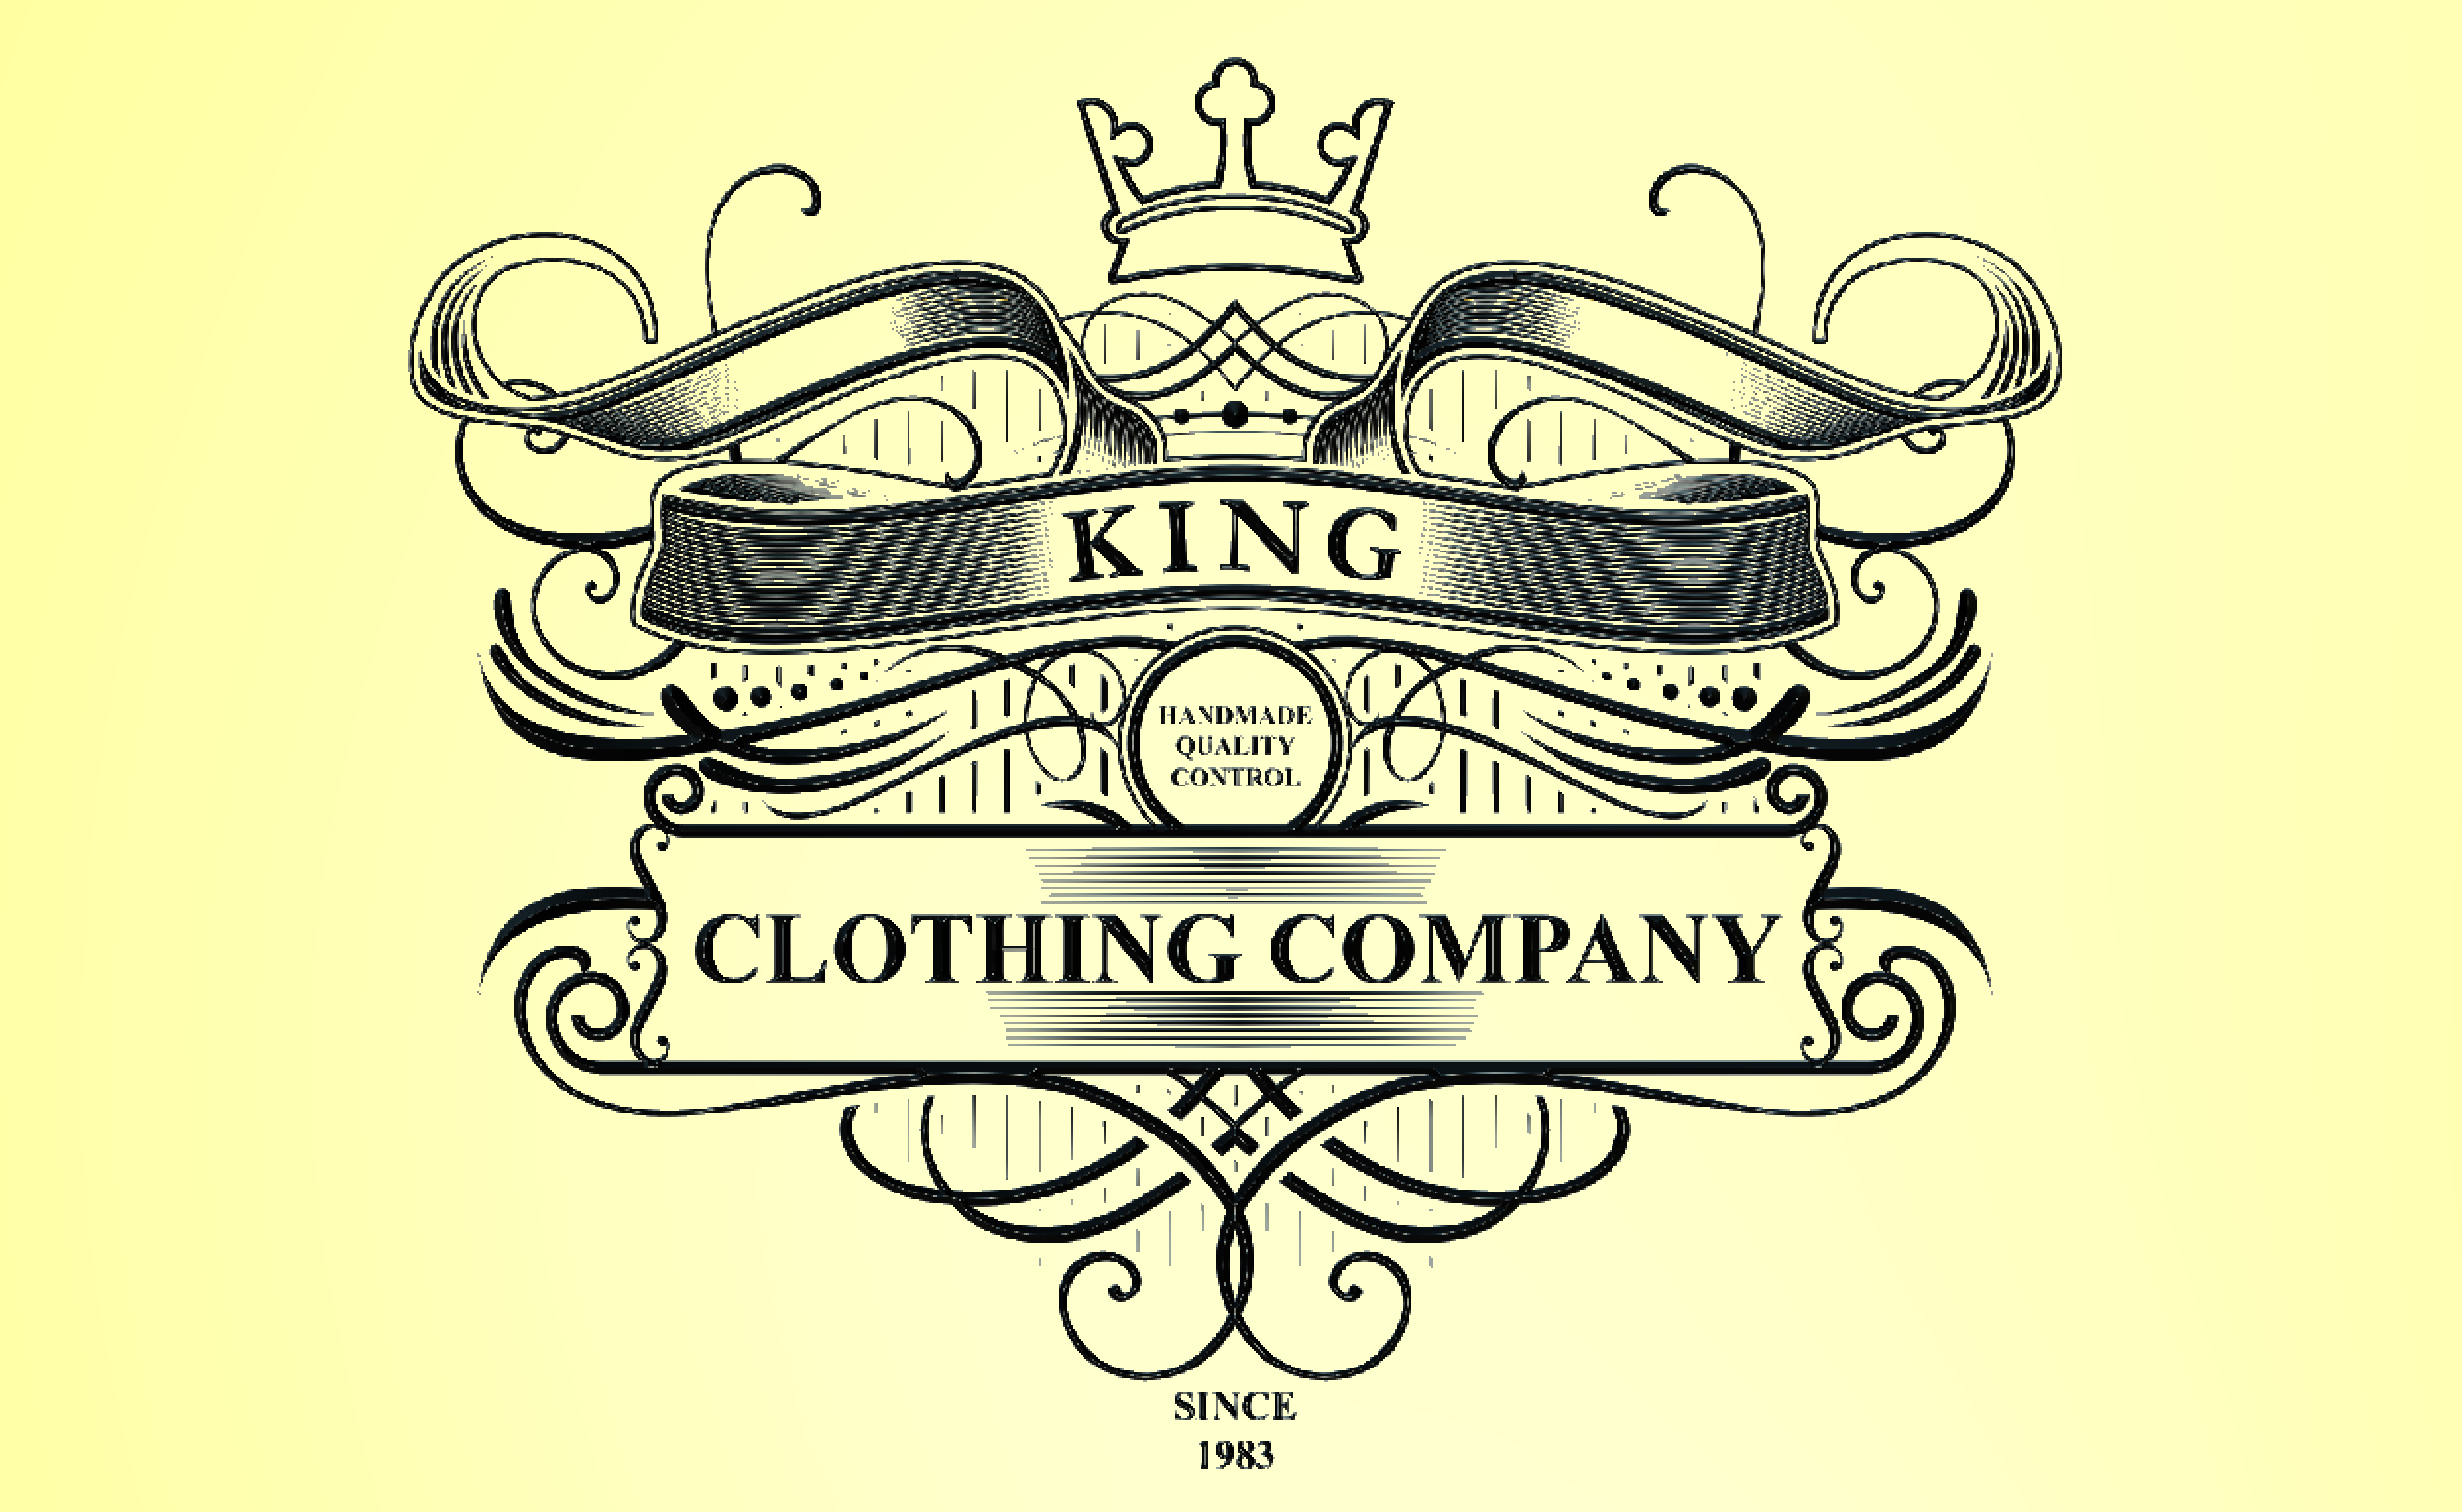 King Clothing Company Engraved plate